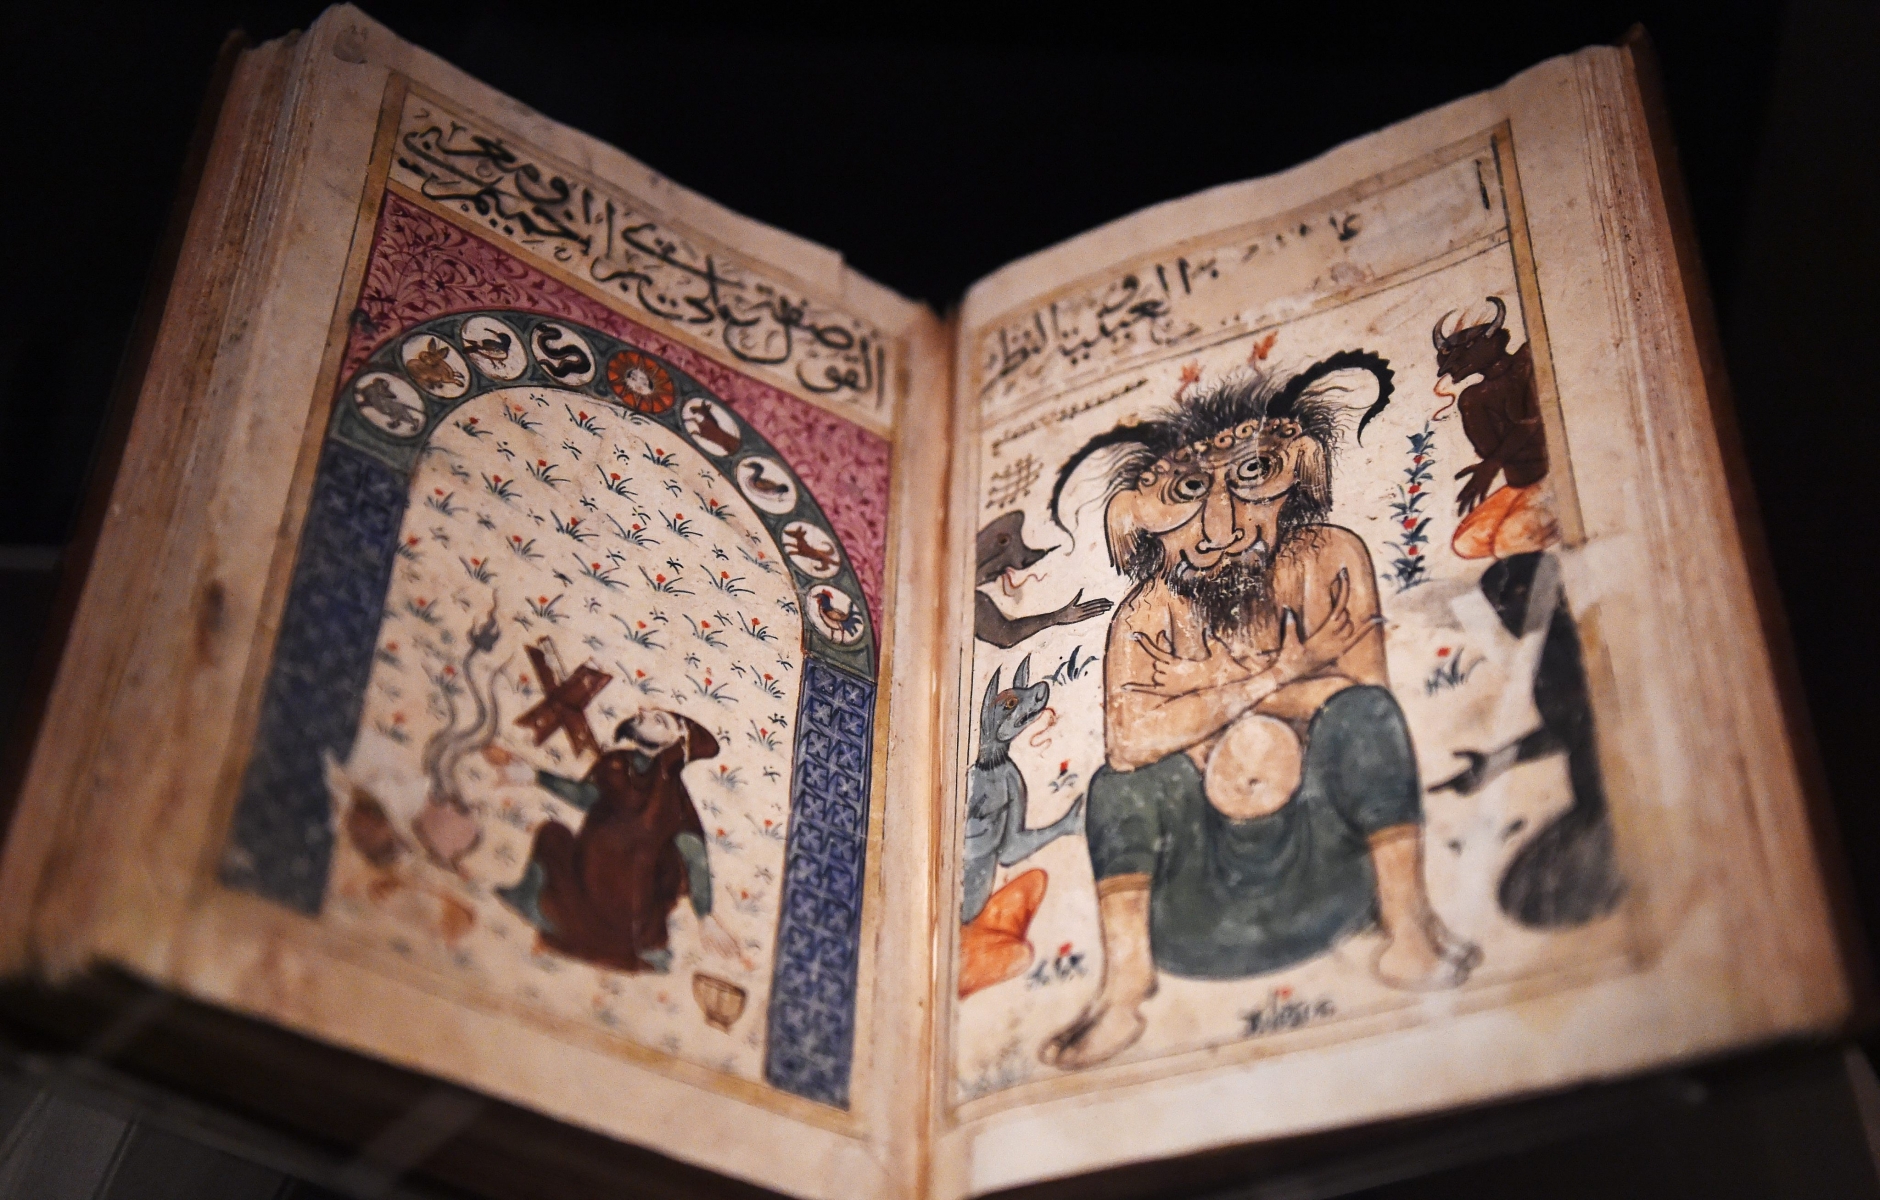 epa04998790 A close-up picture of a Kitab- Al Bulhan or Book of Surprises displayed at the exhibition 'Egypt, Faith after the pharaohs' during its press preview at the British Museum in London, Britain, 27 October 2015. The exhibitions runs from 29 October to 07 February.  EPA/FACUNDO ARRIZABALAGA BRITAIN MUSEUMS